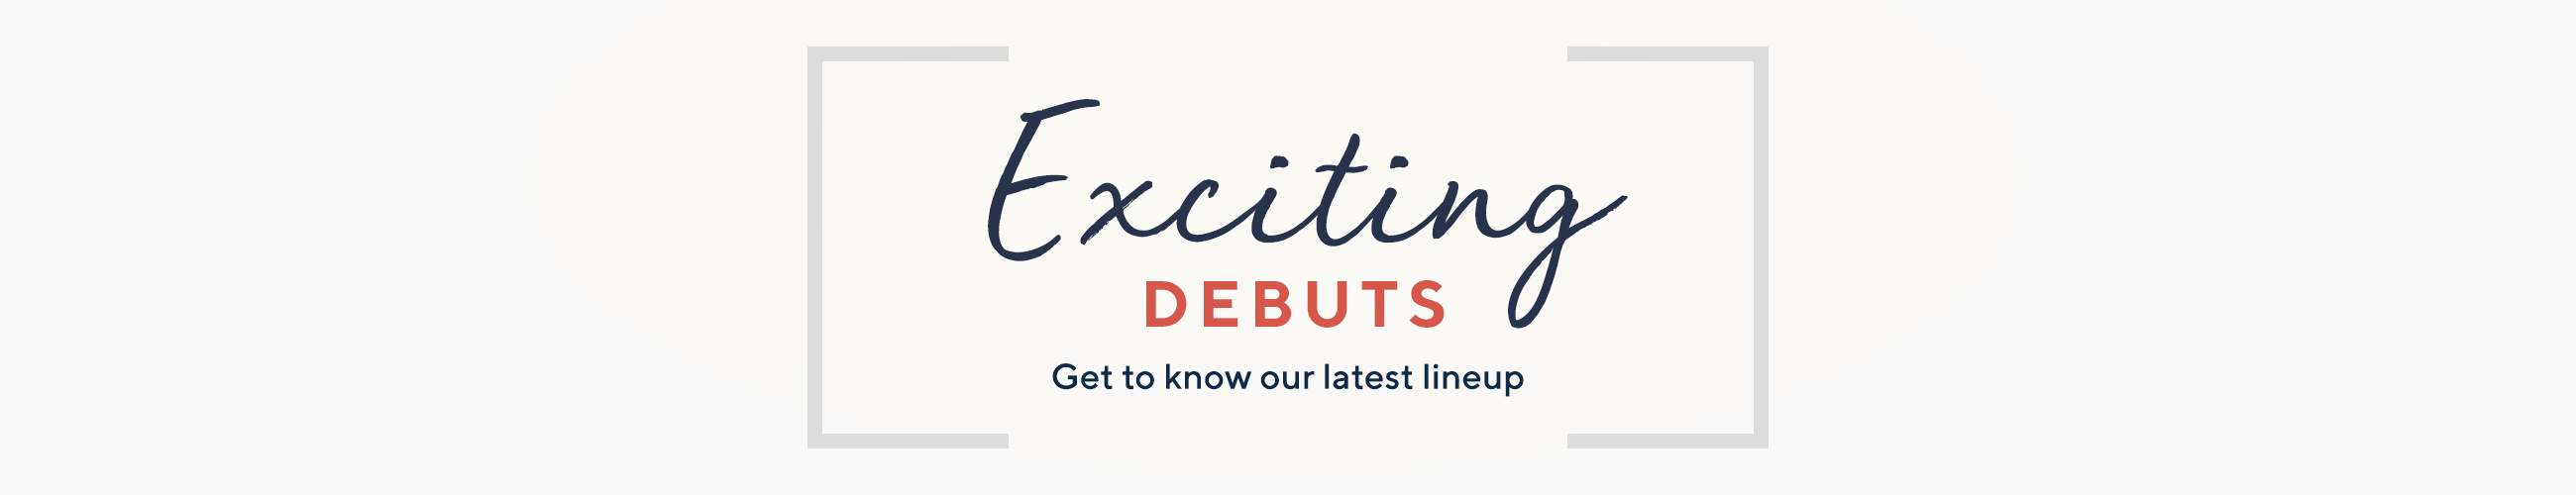 Exciting Debuts  Get to know our latest lineup